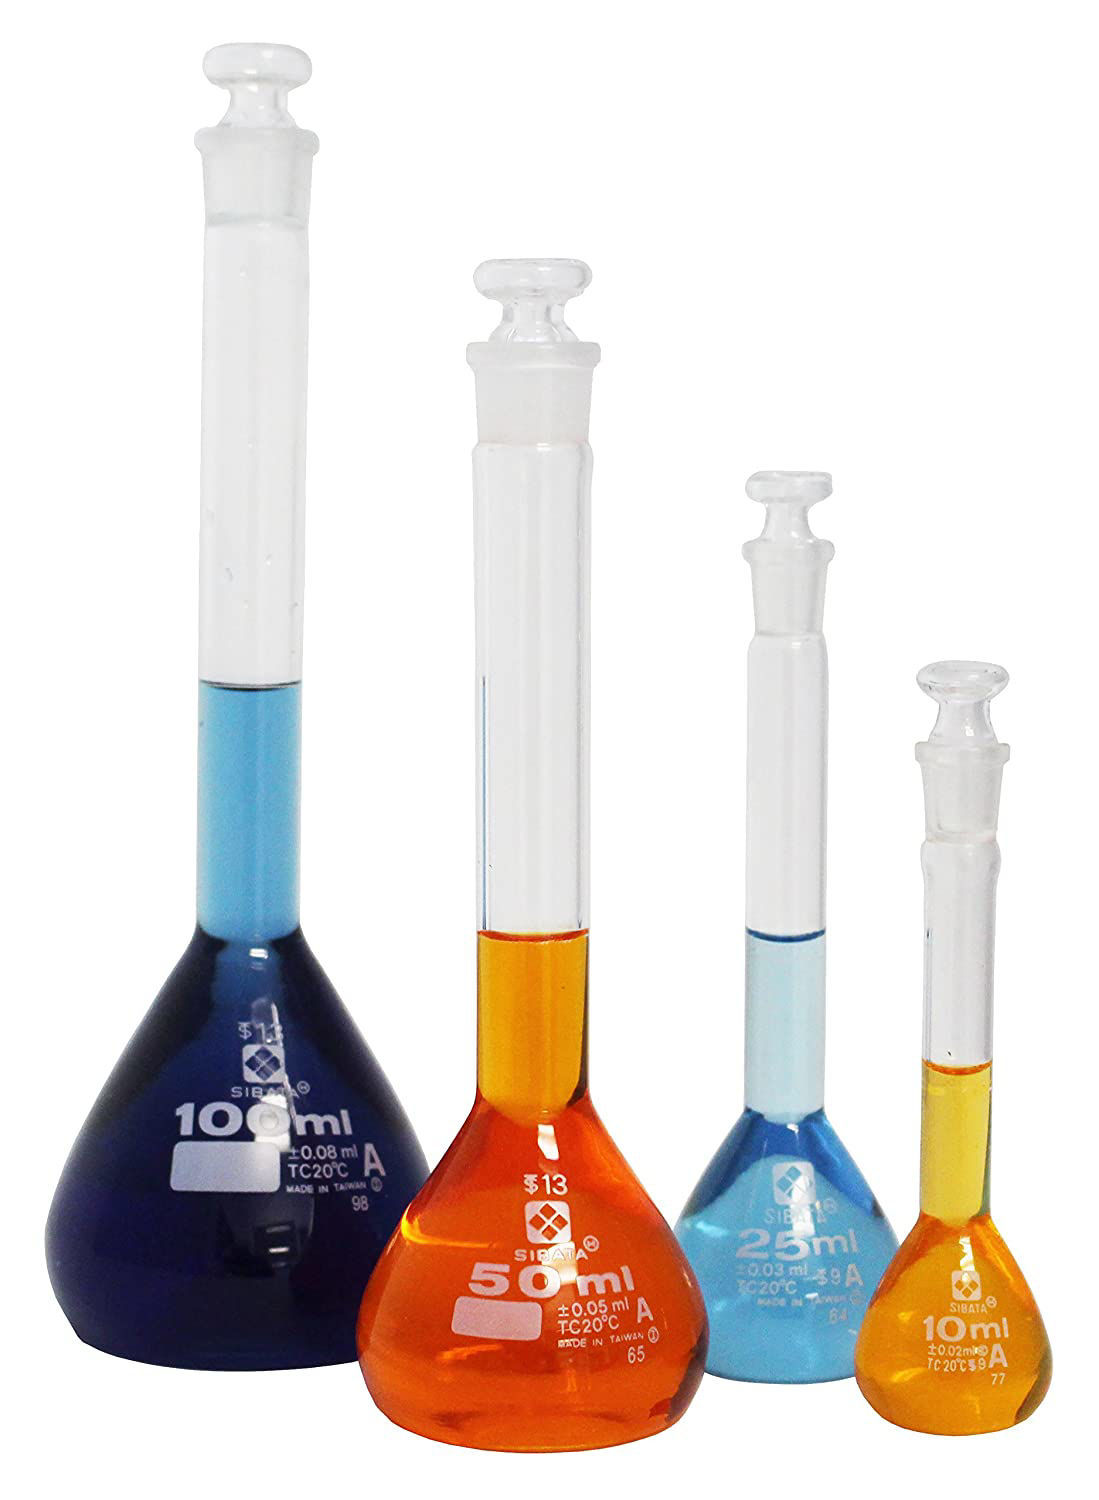 Volumetric flasks of various sizes with glass stoppers